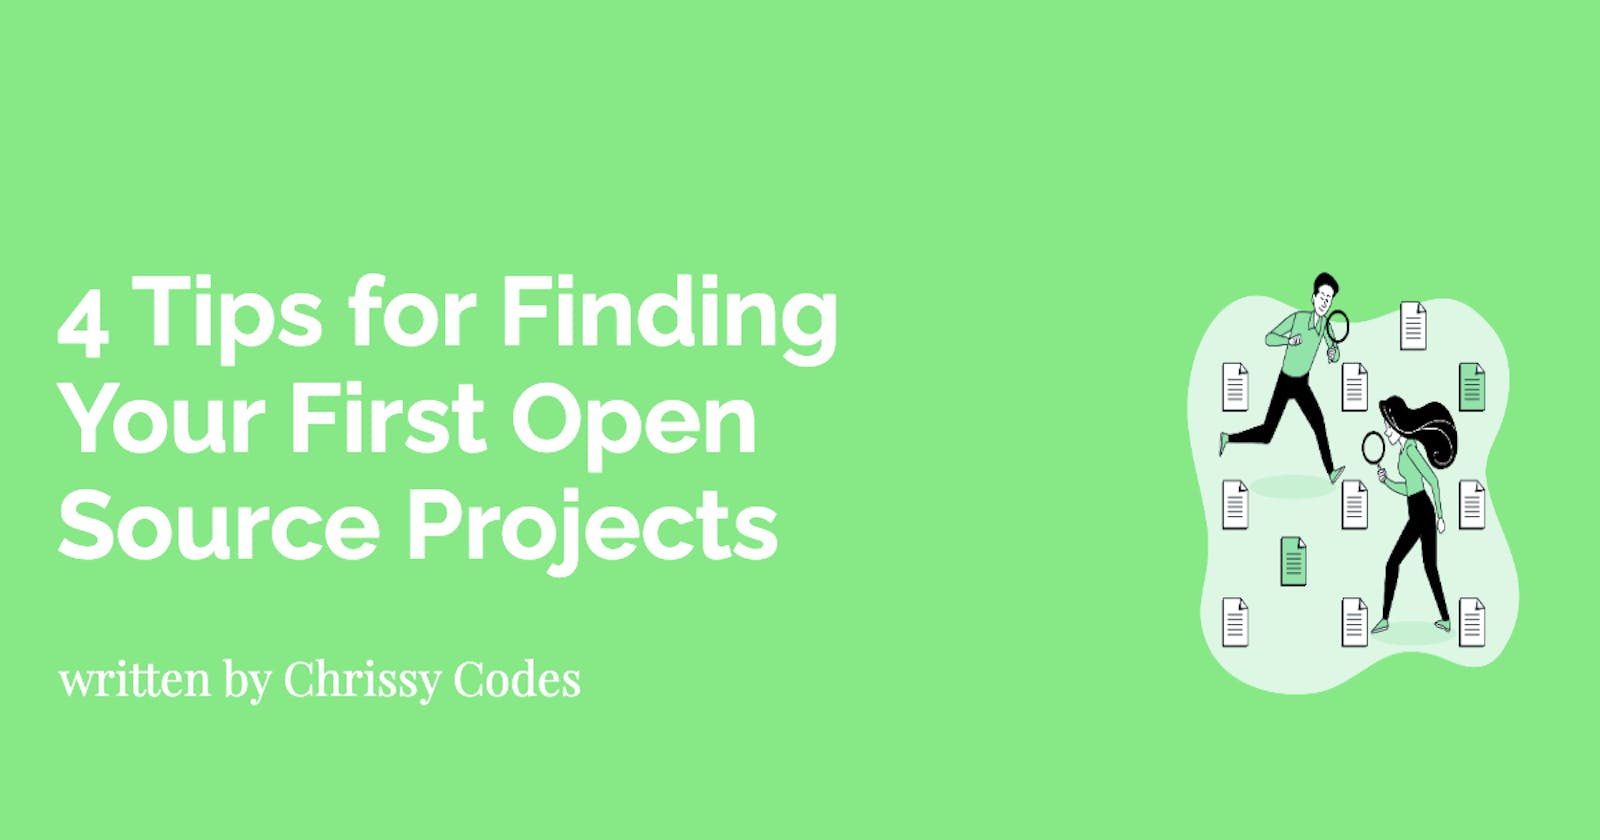 4 Tips for Finding Your First Open Source Project